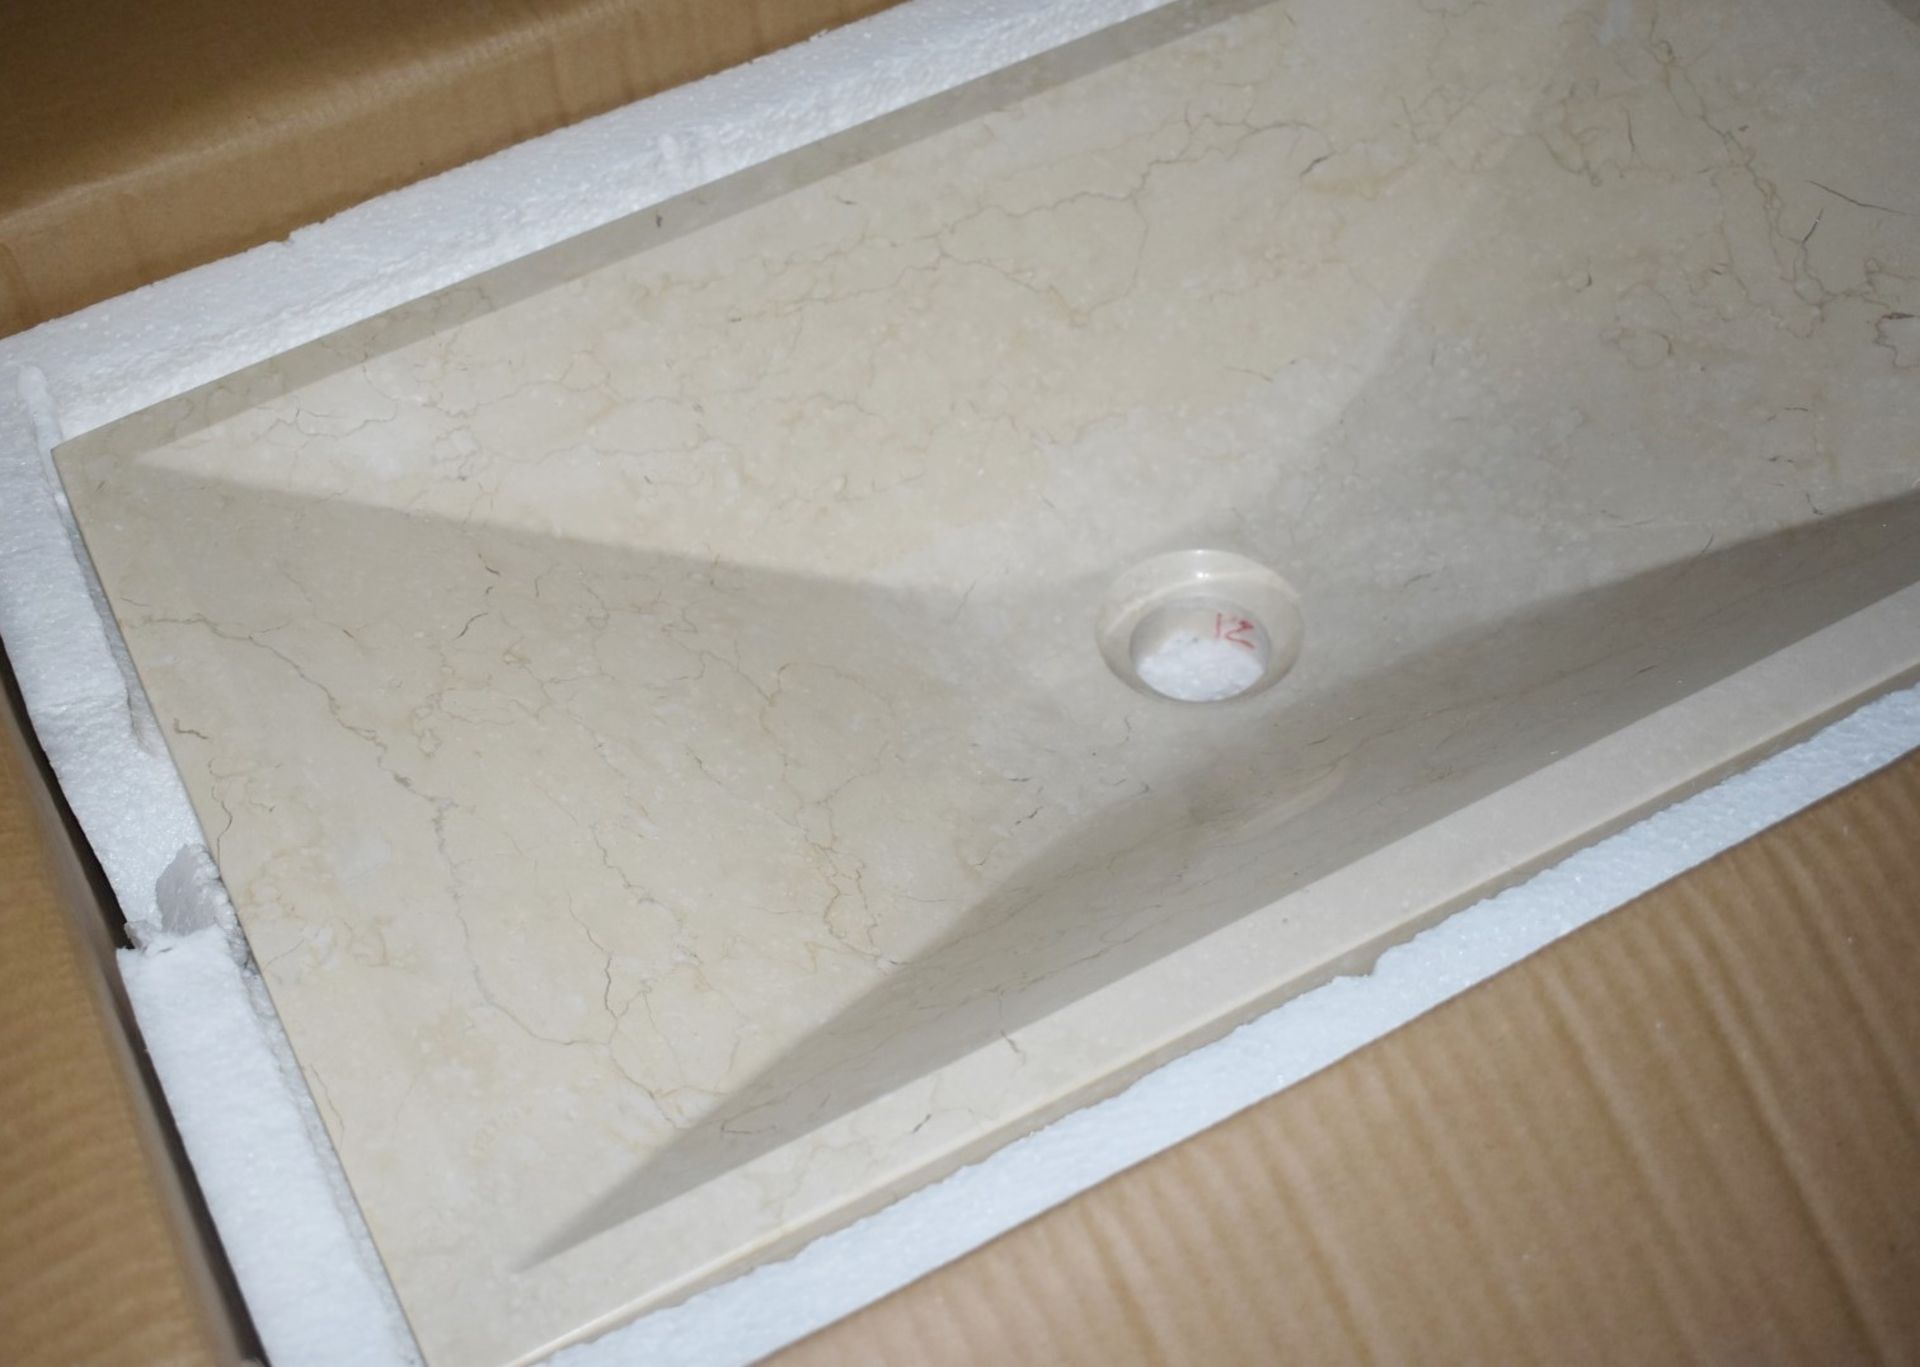 1 x Stonearth 'Karo' Solid Galala Marble Stone Countertop Sink Basin - New Boxed Stock - RRP £ - Image 5 of 8